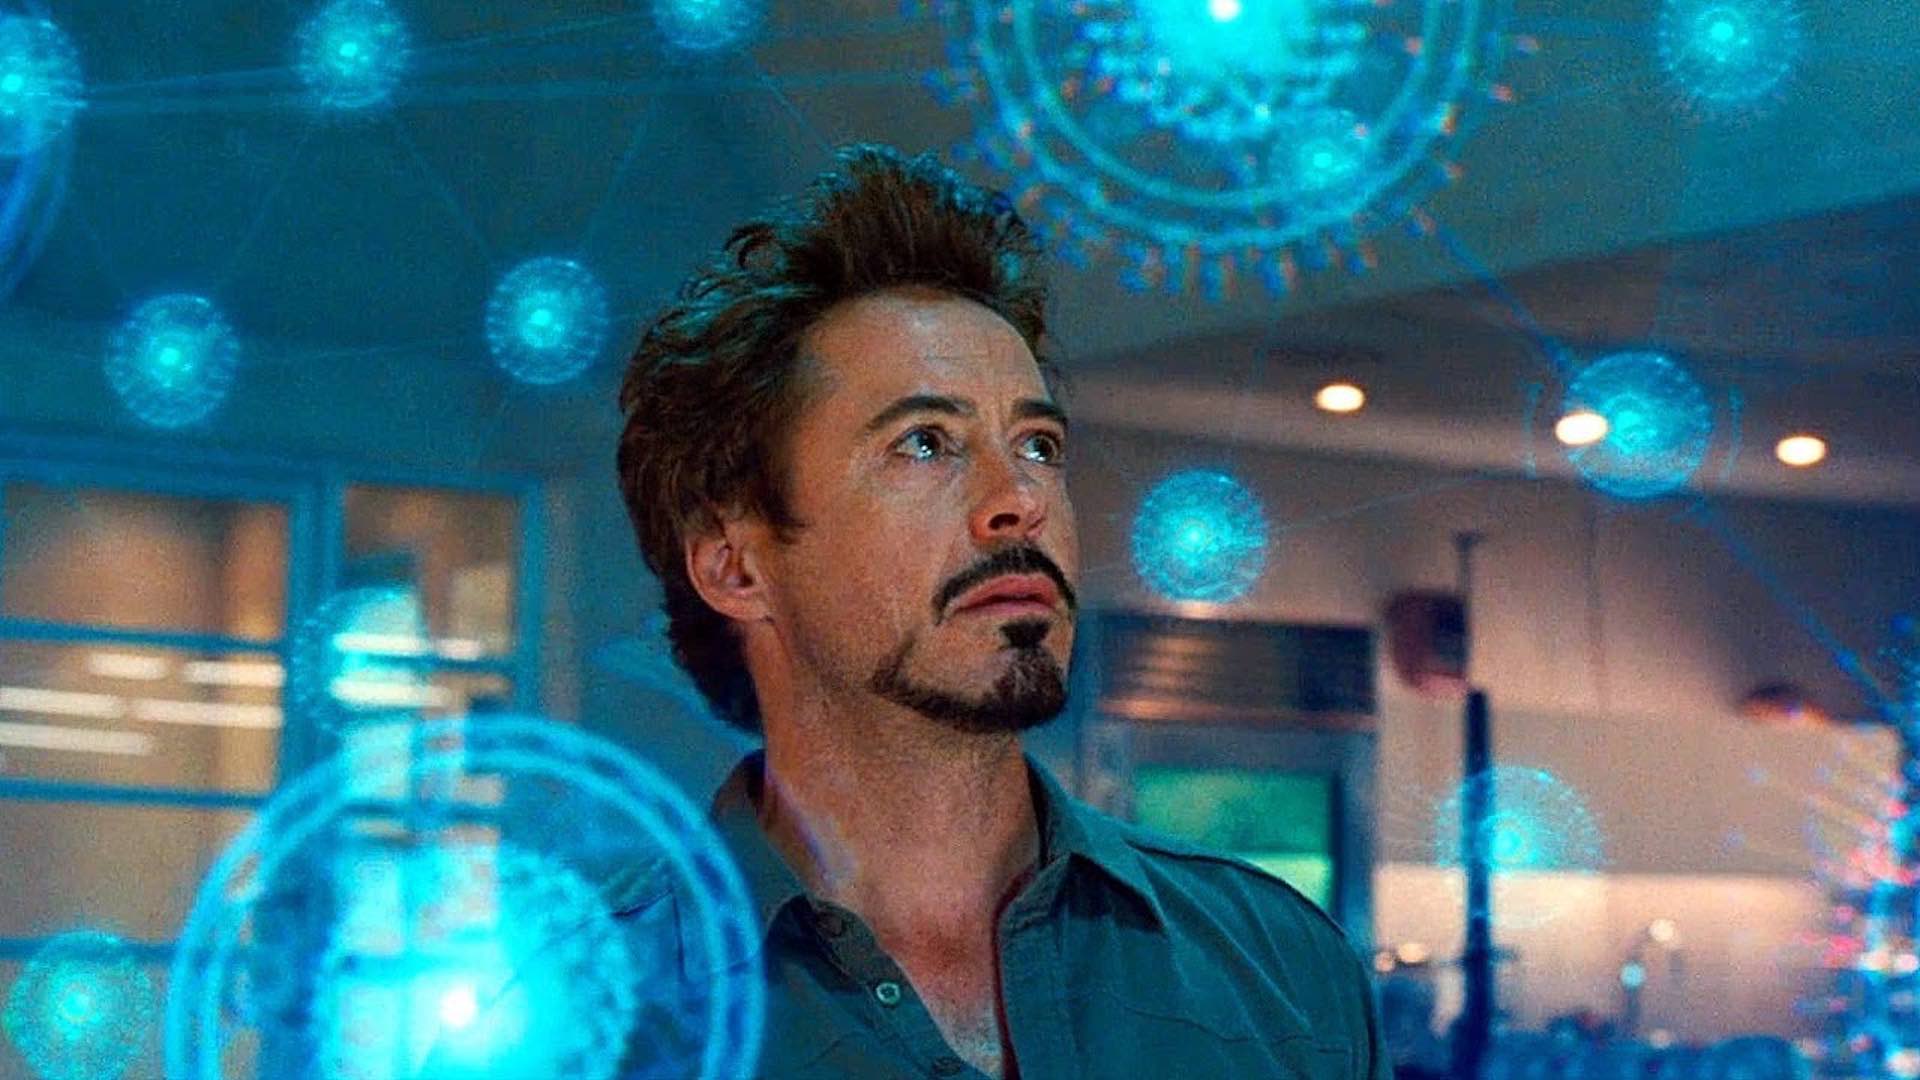 An American movie star best known for his role as Iron Man “Tony Stark” in ...